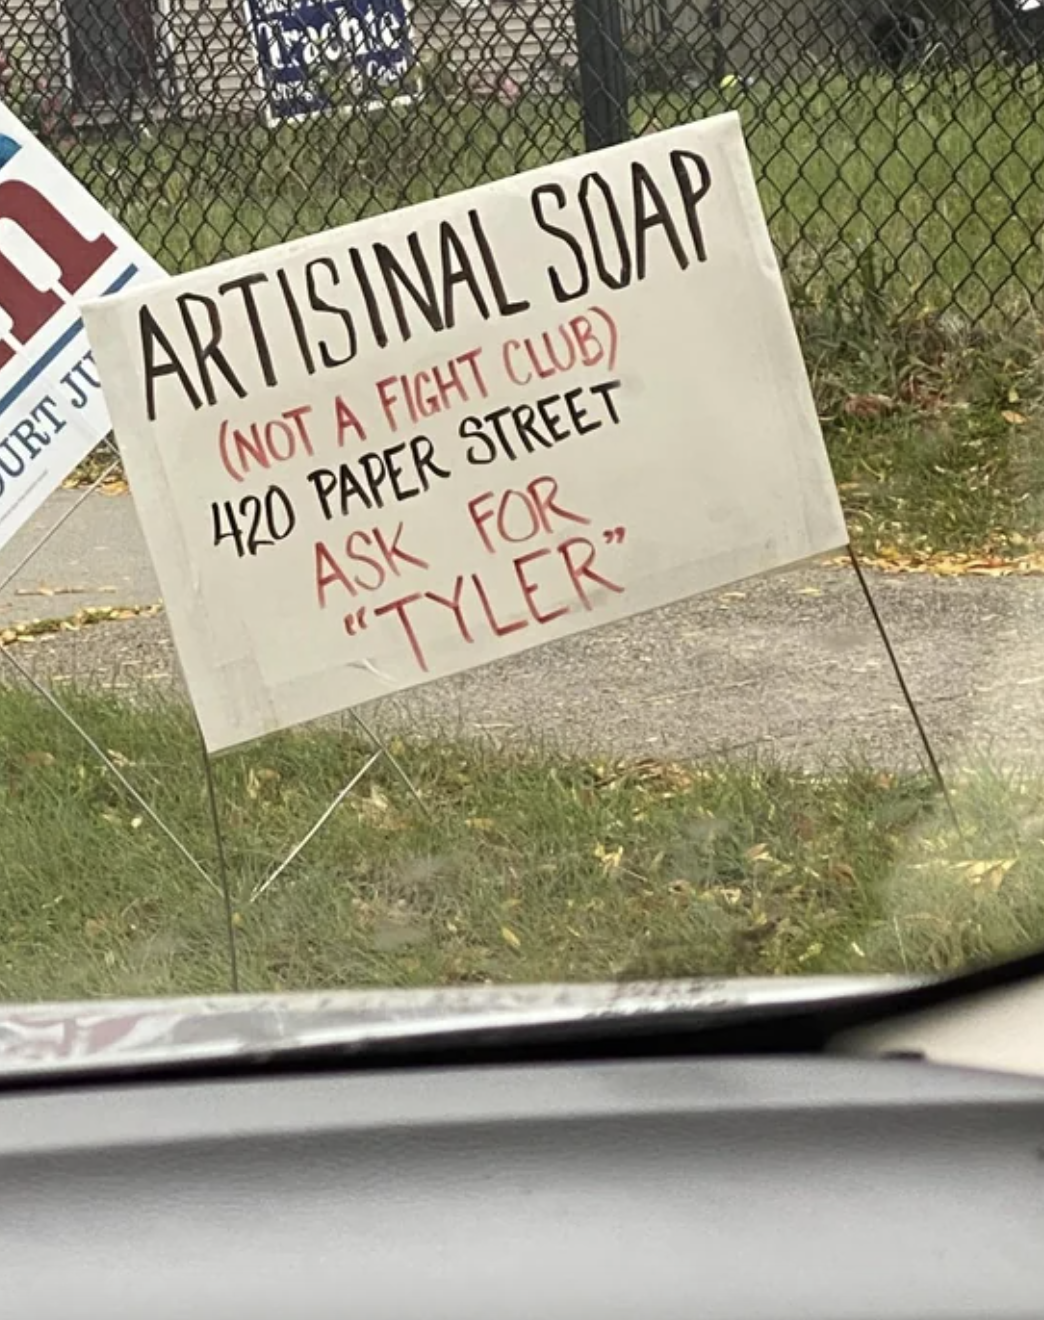 artisanal soap, not a fight club, ask for tyler